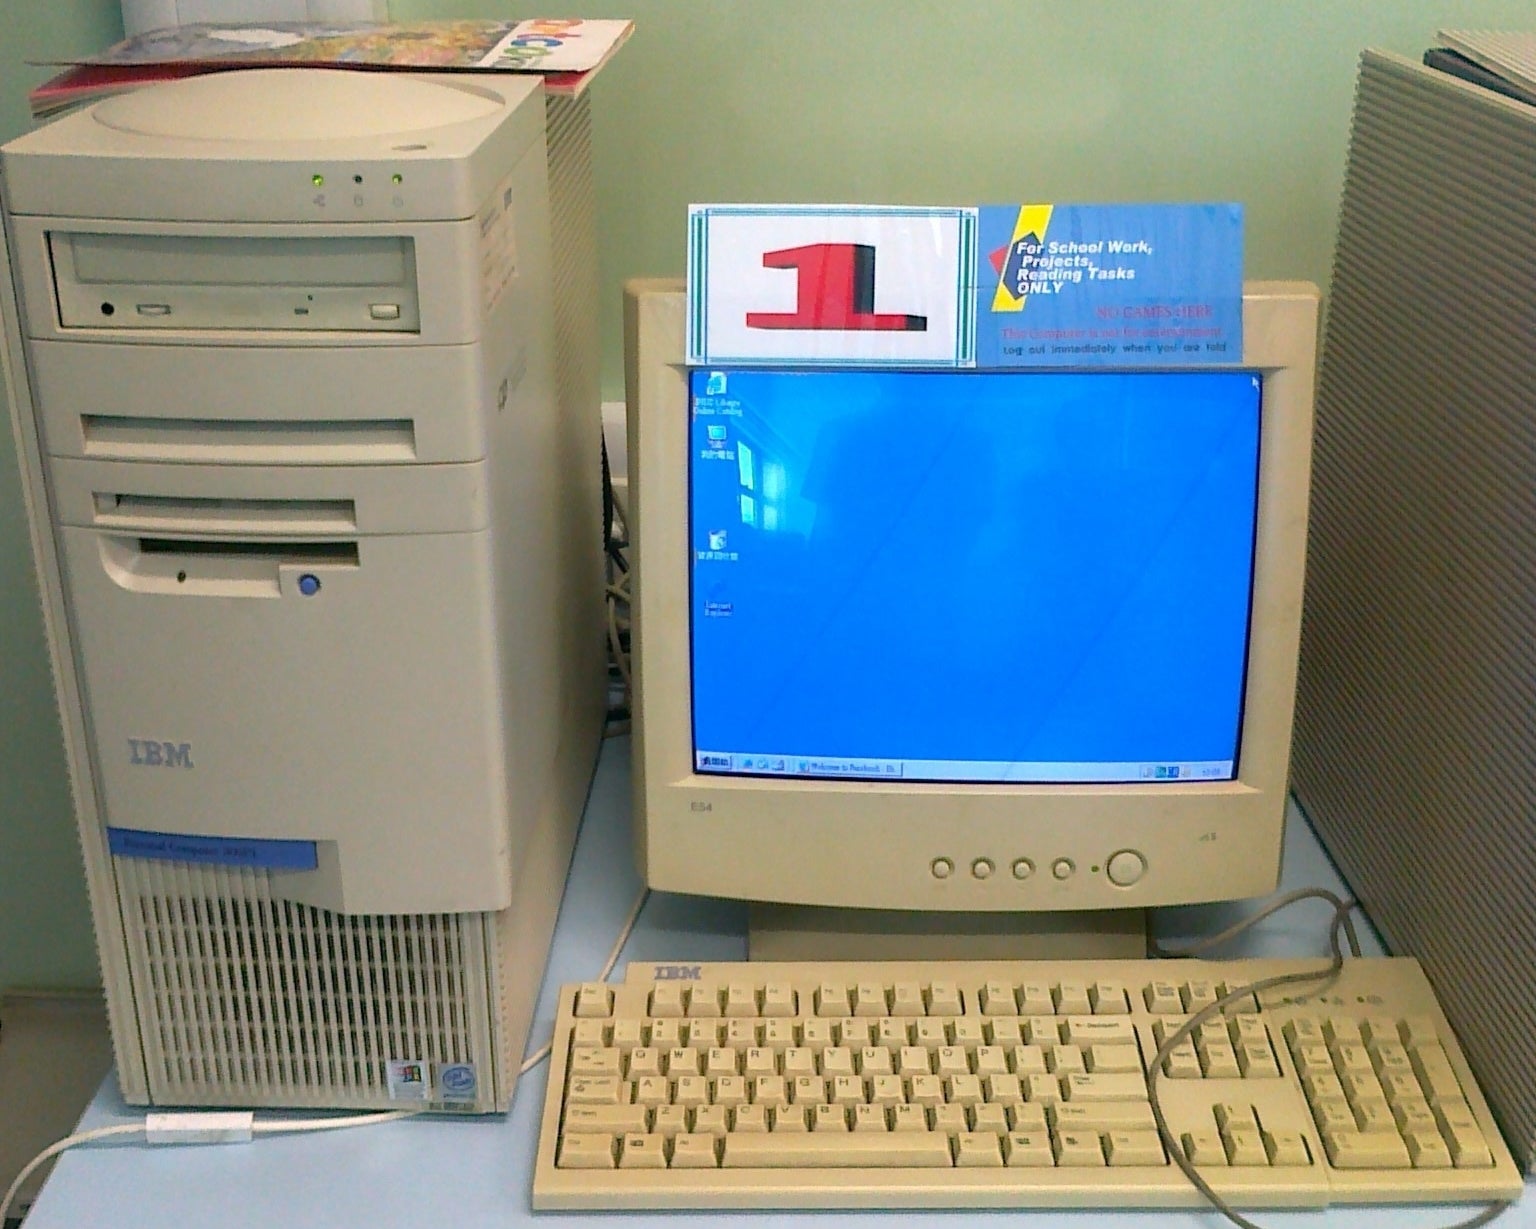 Vintage computer setup with monitor displaying desktop and tower unit beside it